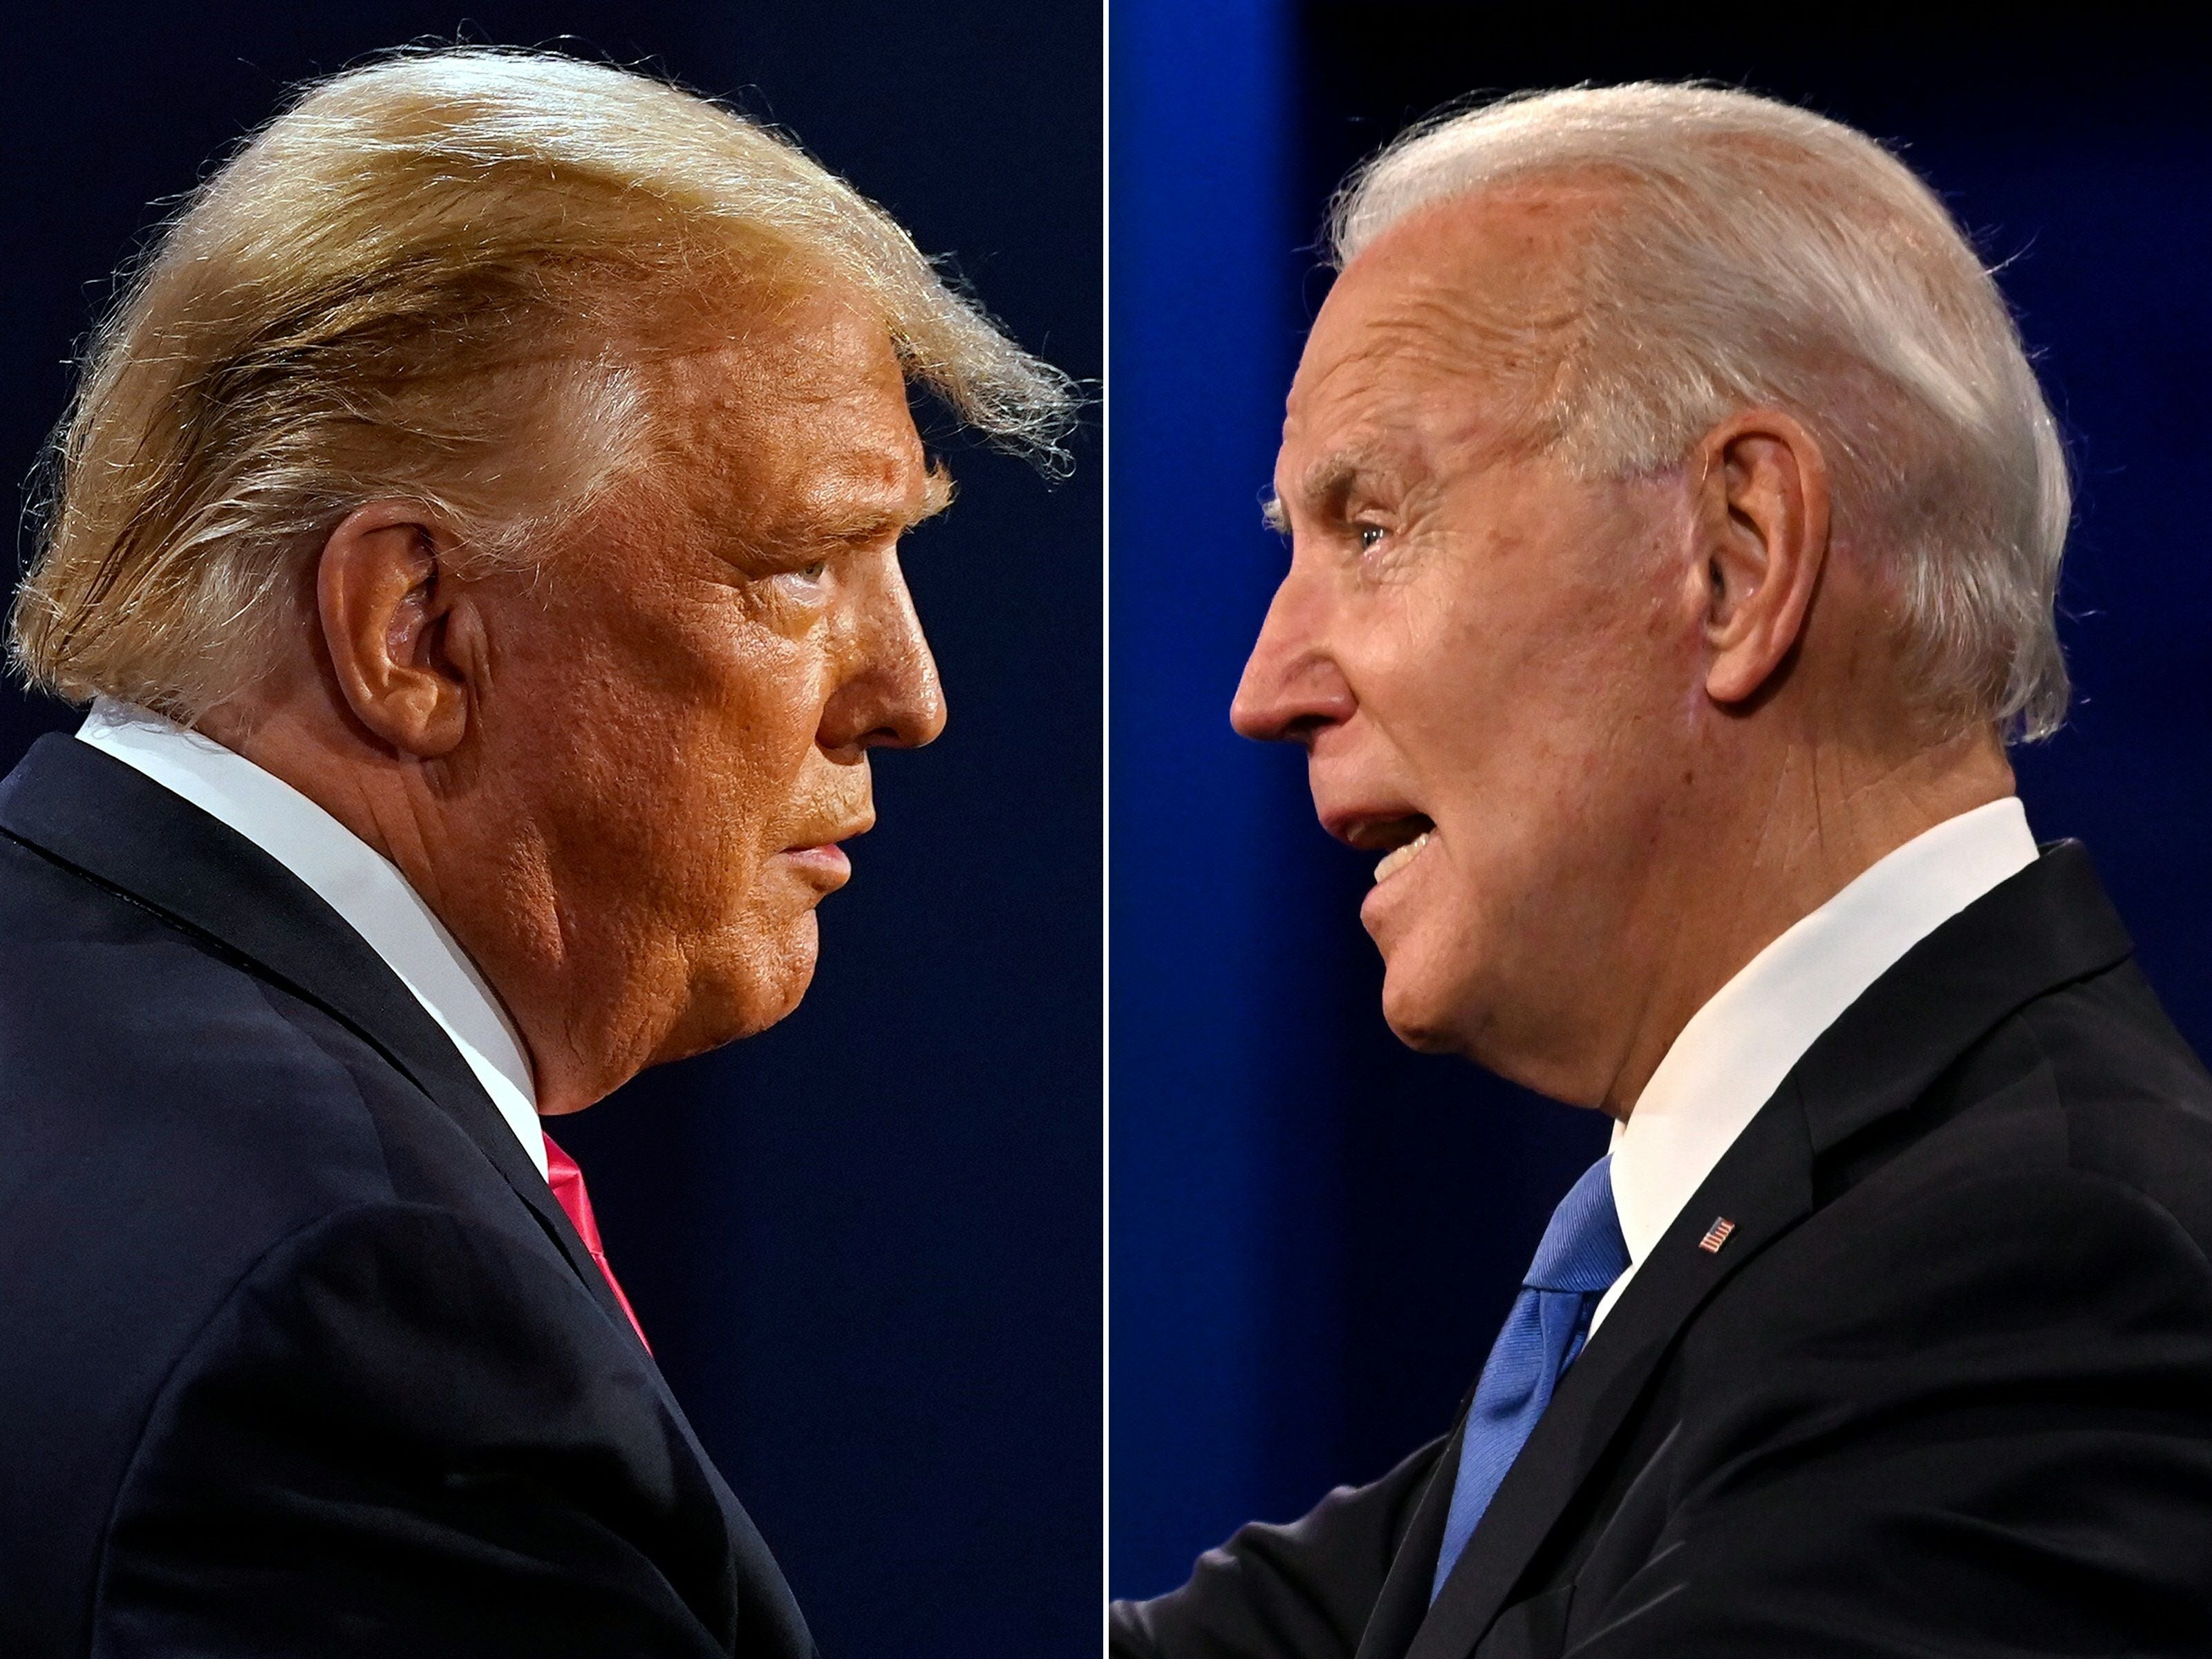 Biden’s ratings saw a jump of six percentage points, while Trump’s tumbled down by three, between pre and post-election periods